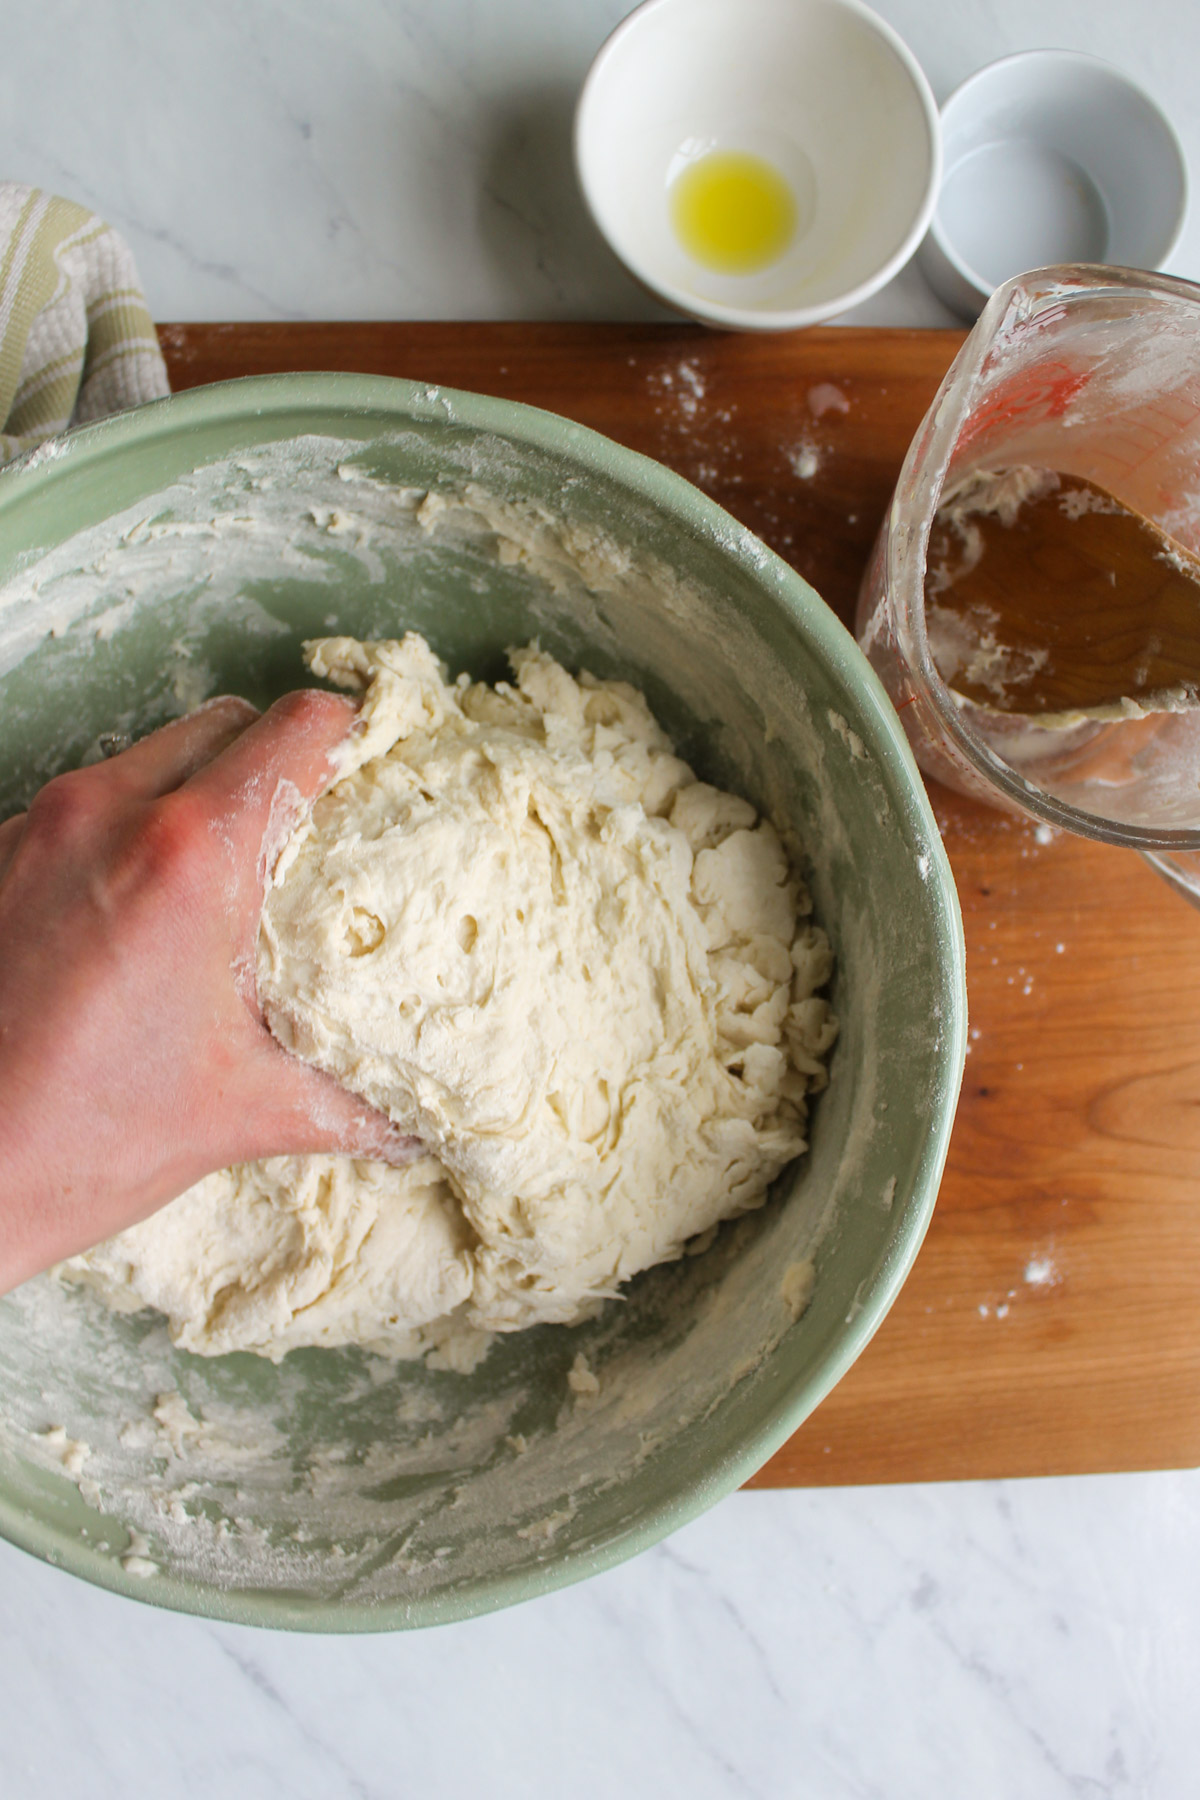 Mixing the dough ball by hand.